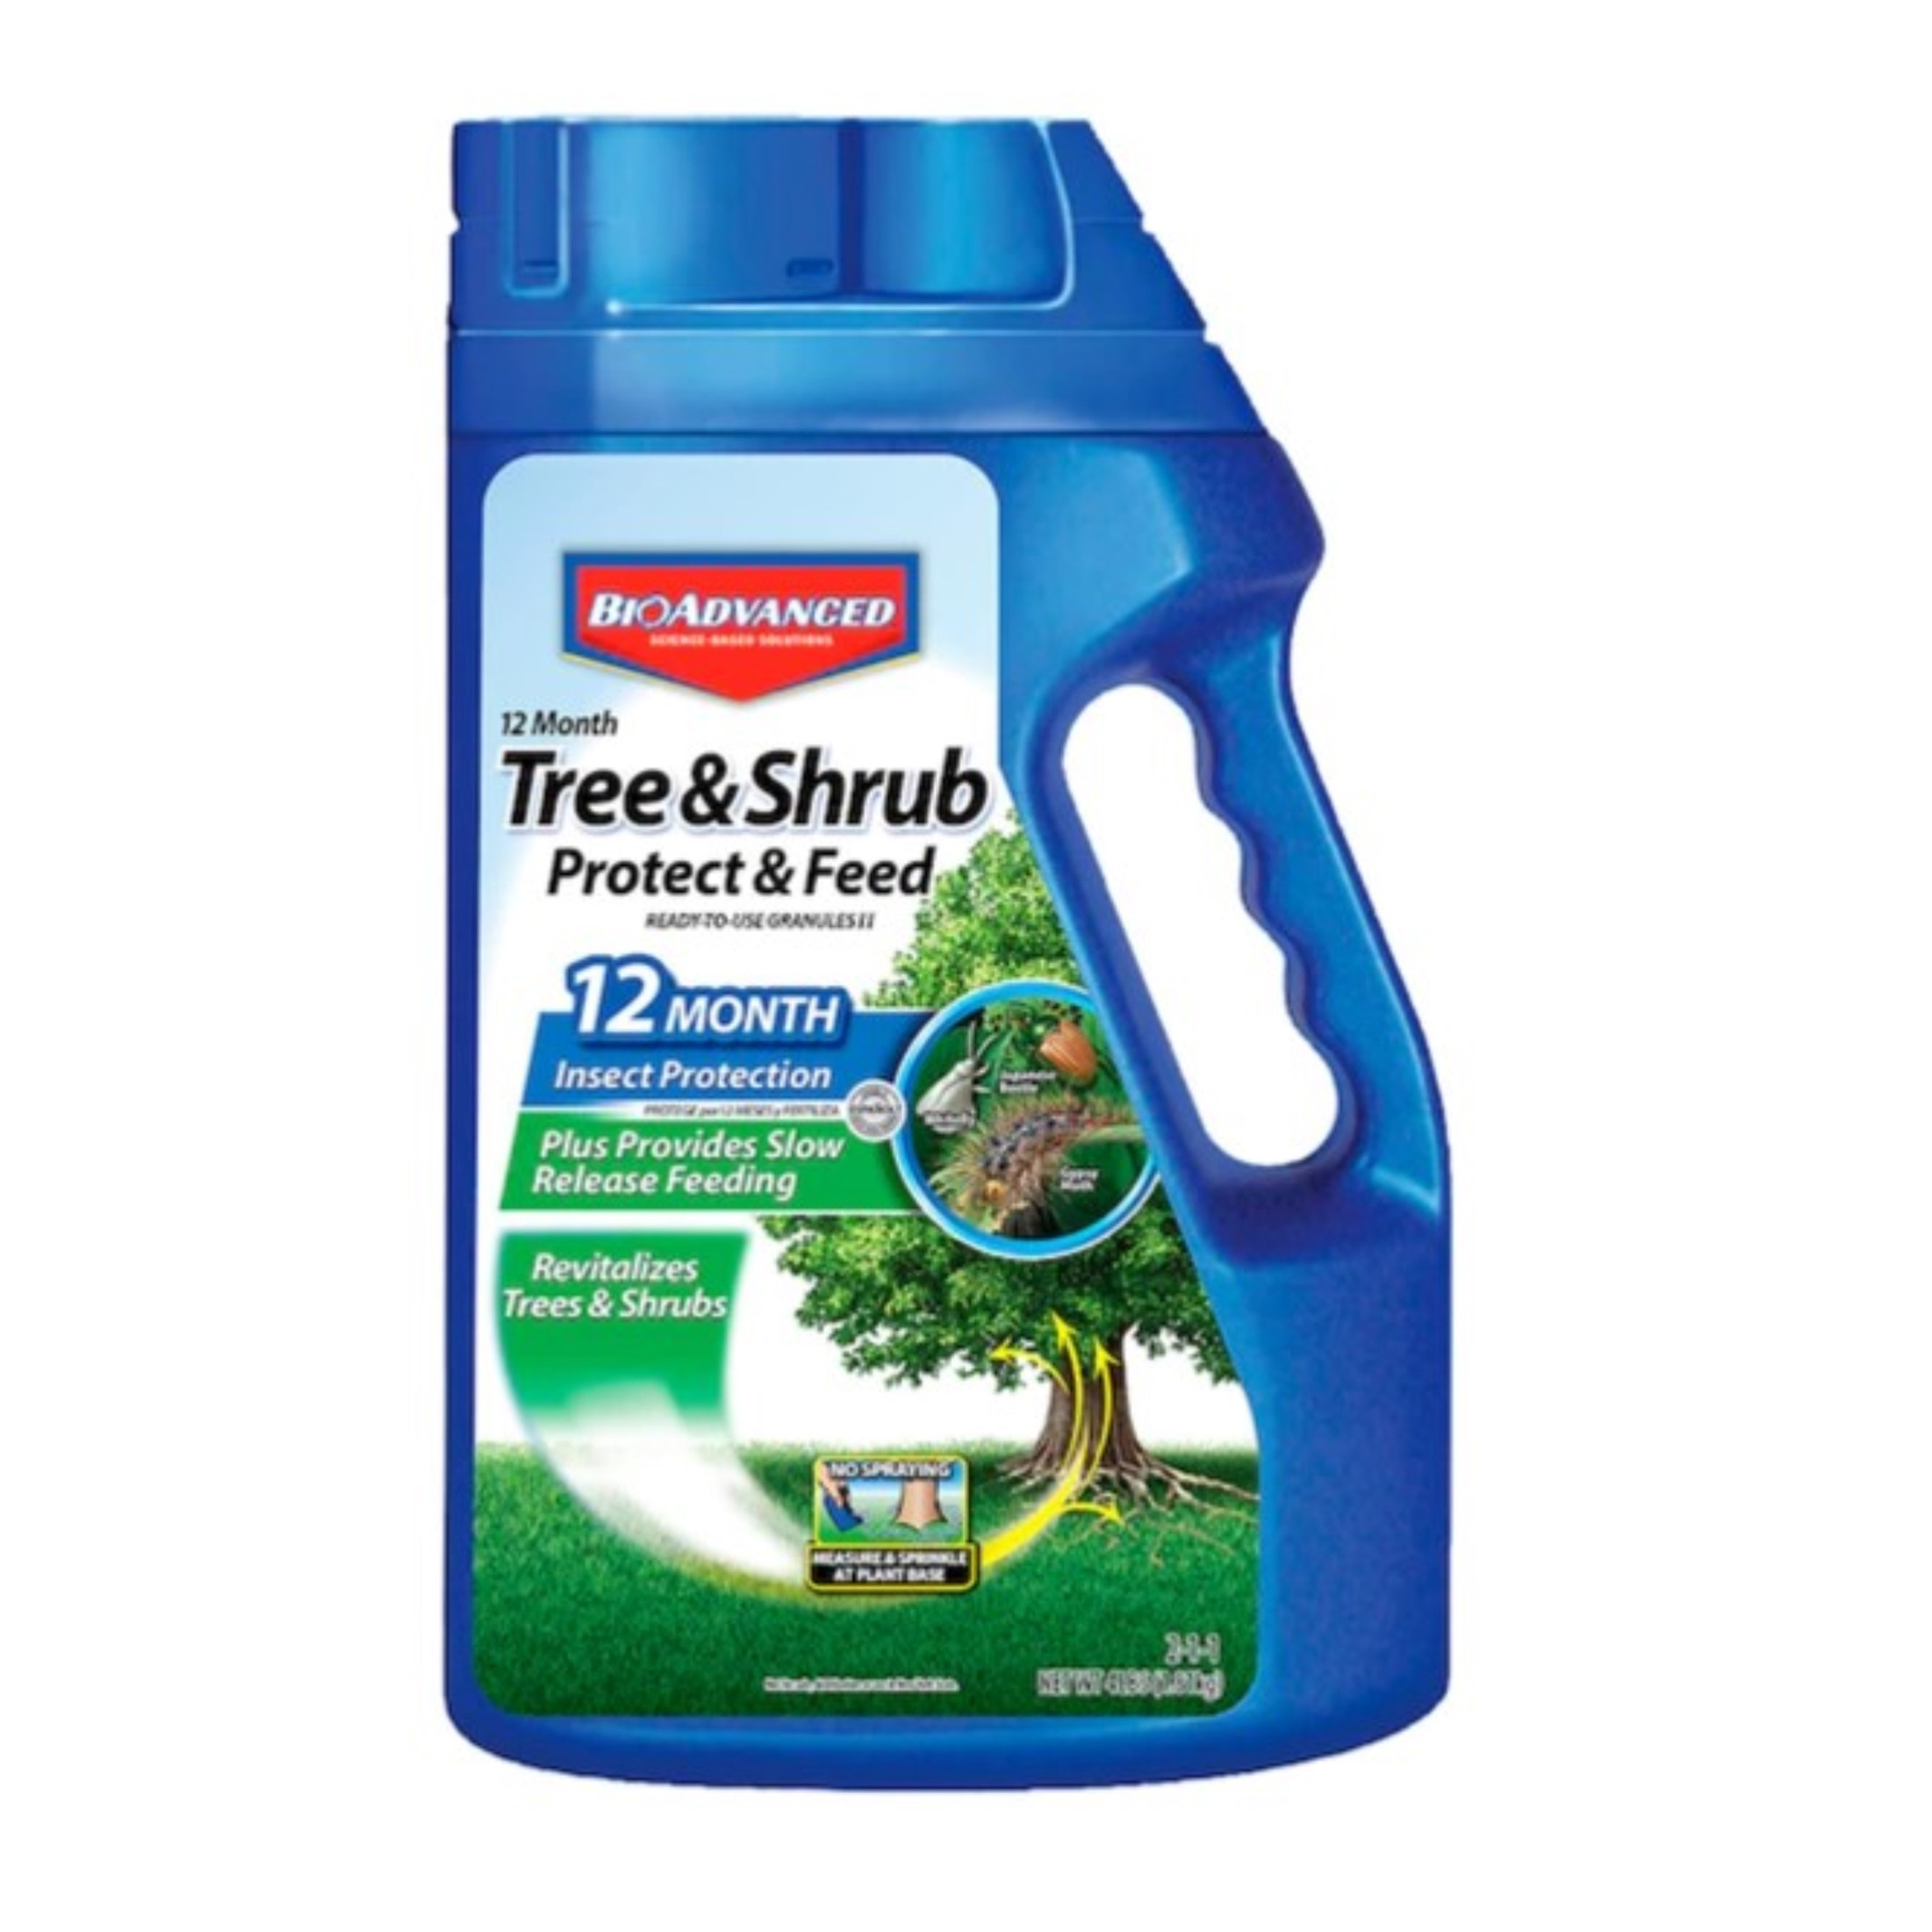 BioAdvance 12 Month Tree and Shrub Protect and Feed Granules, 4LB Bag